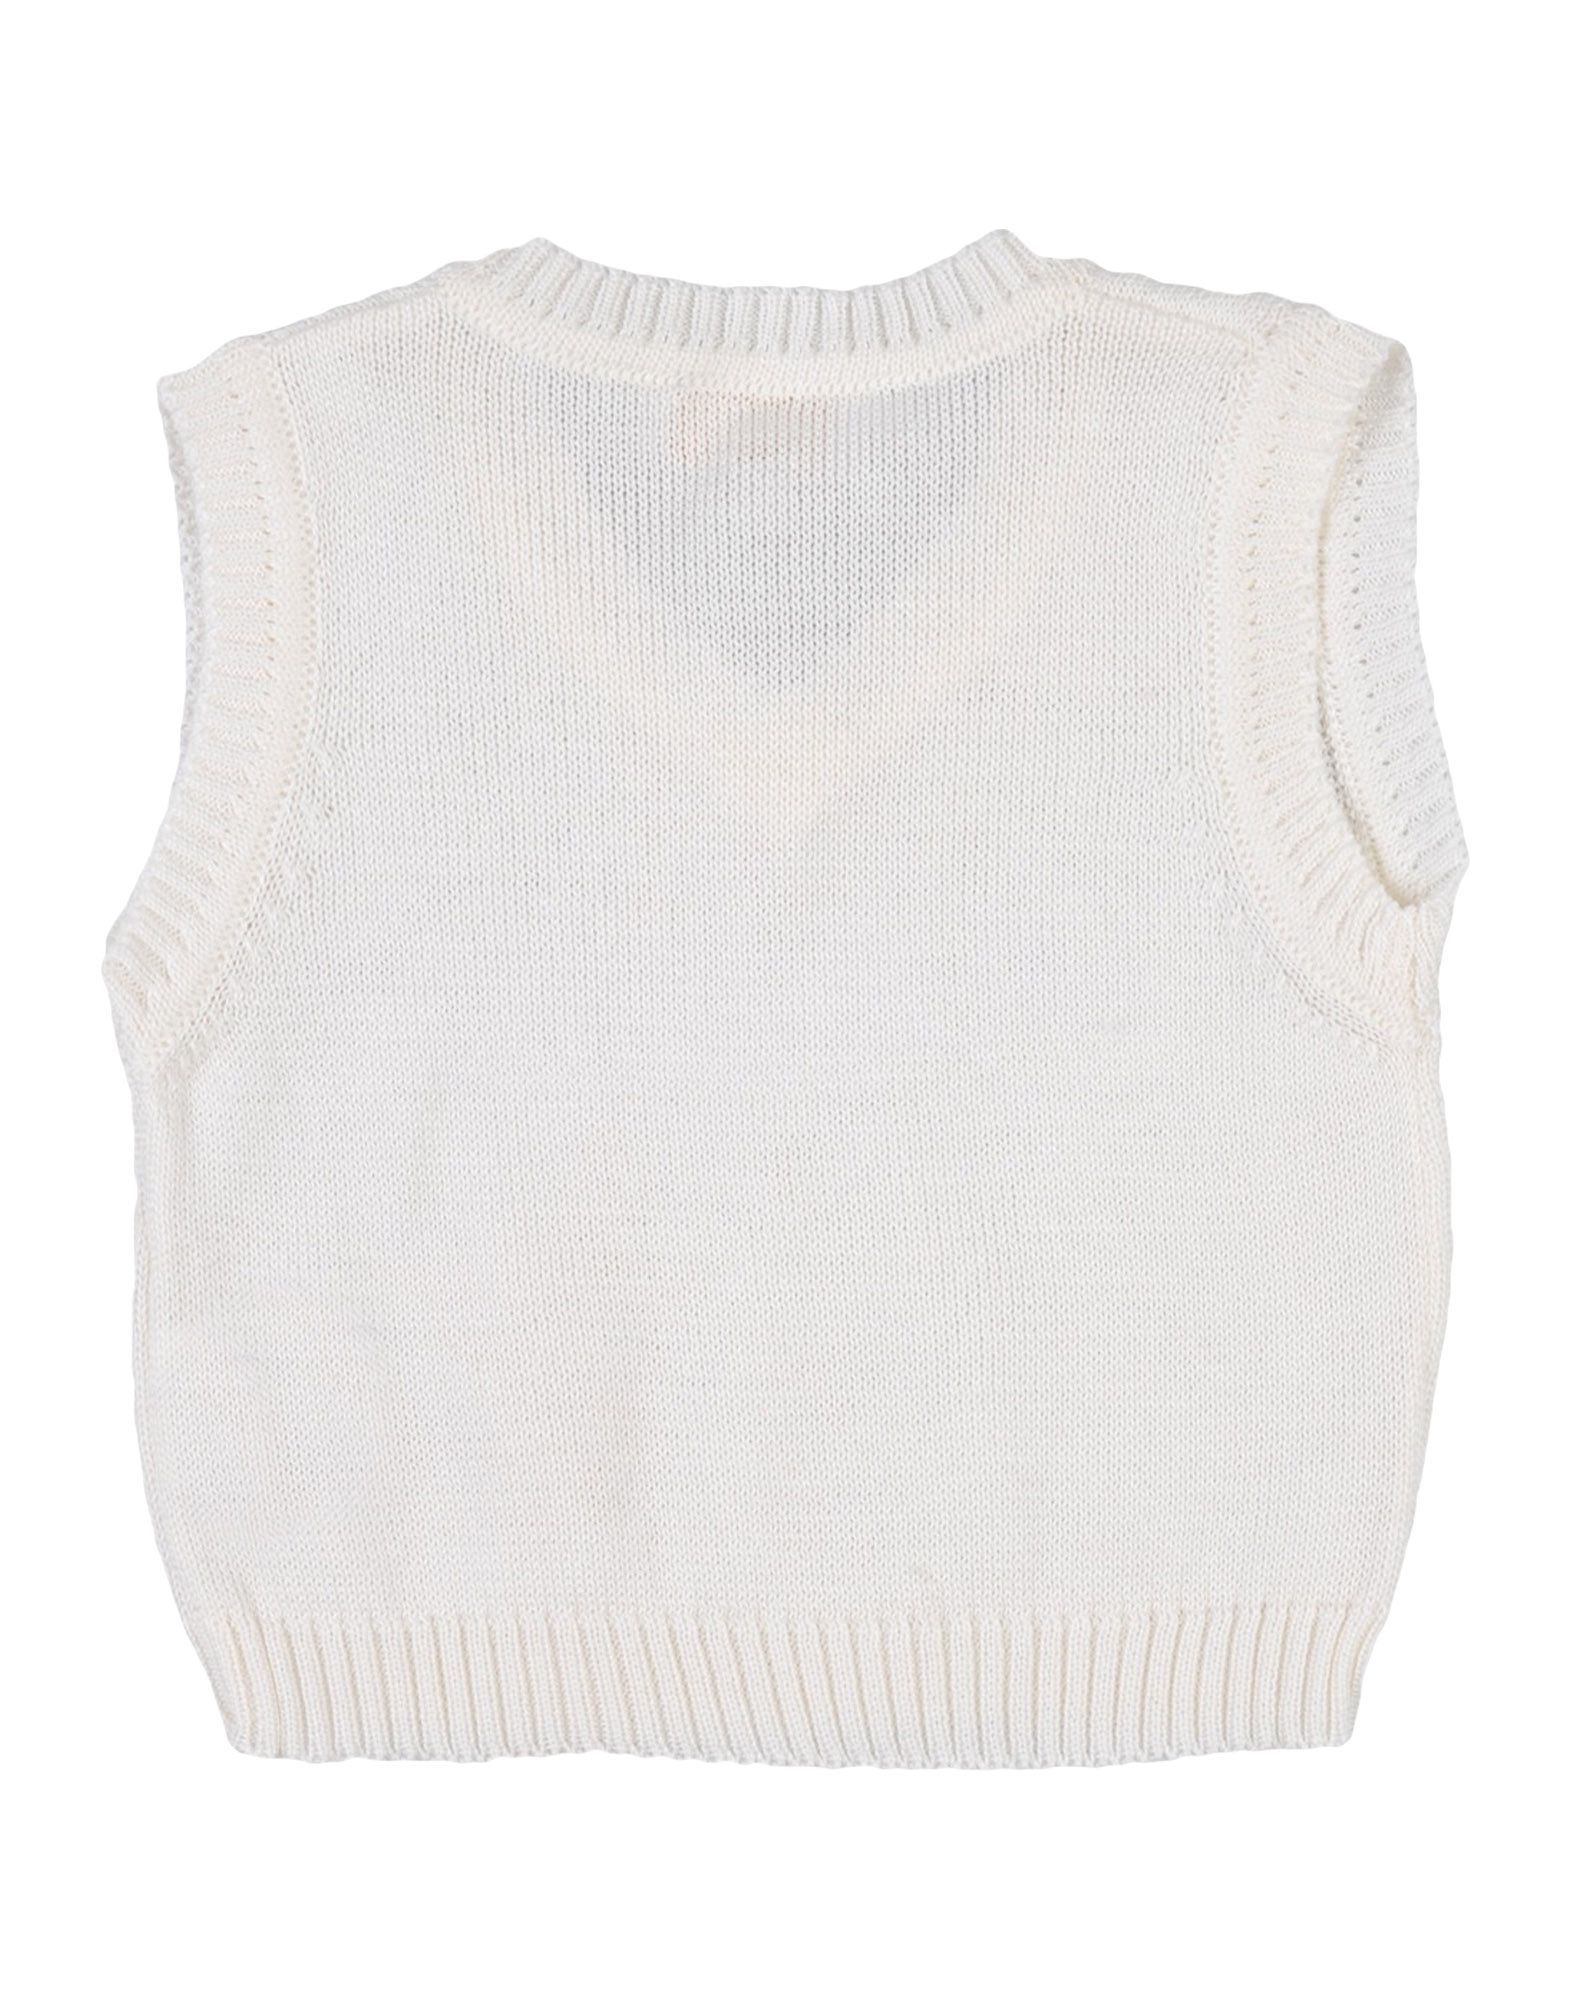 knitted, no appliqu�s, solid colour, v-neck, lightweight knitted, sleeveless, no pockets, hand-washing recommended, dry cleanable, iron at 110� c max, do not bleach, do not tumble dry